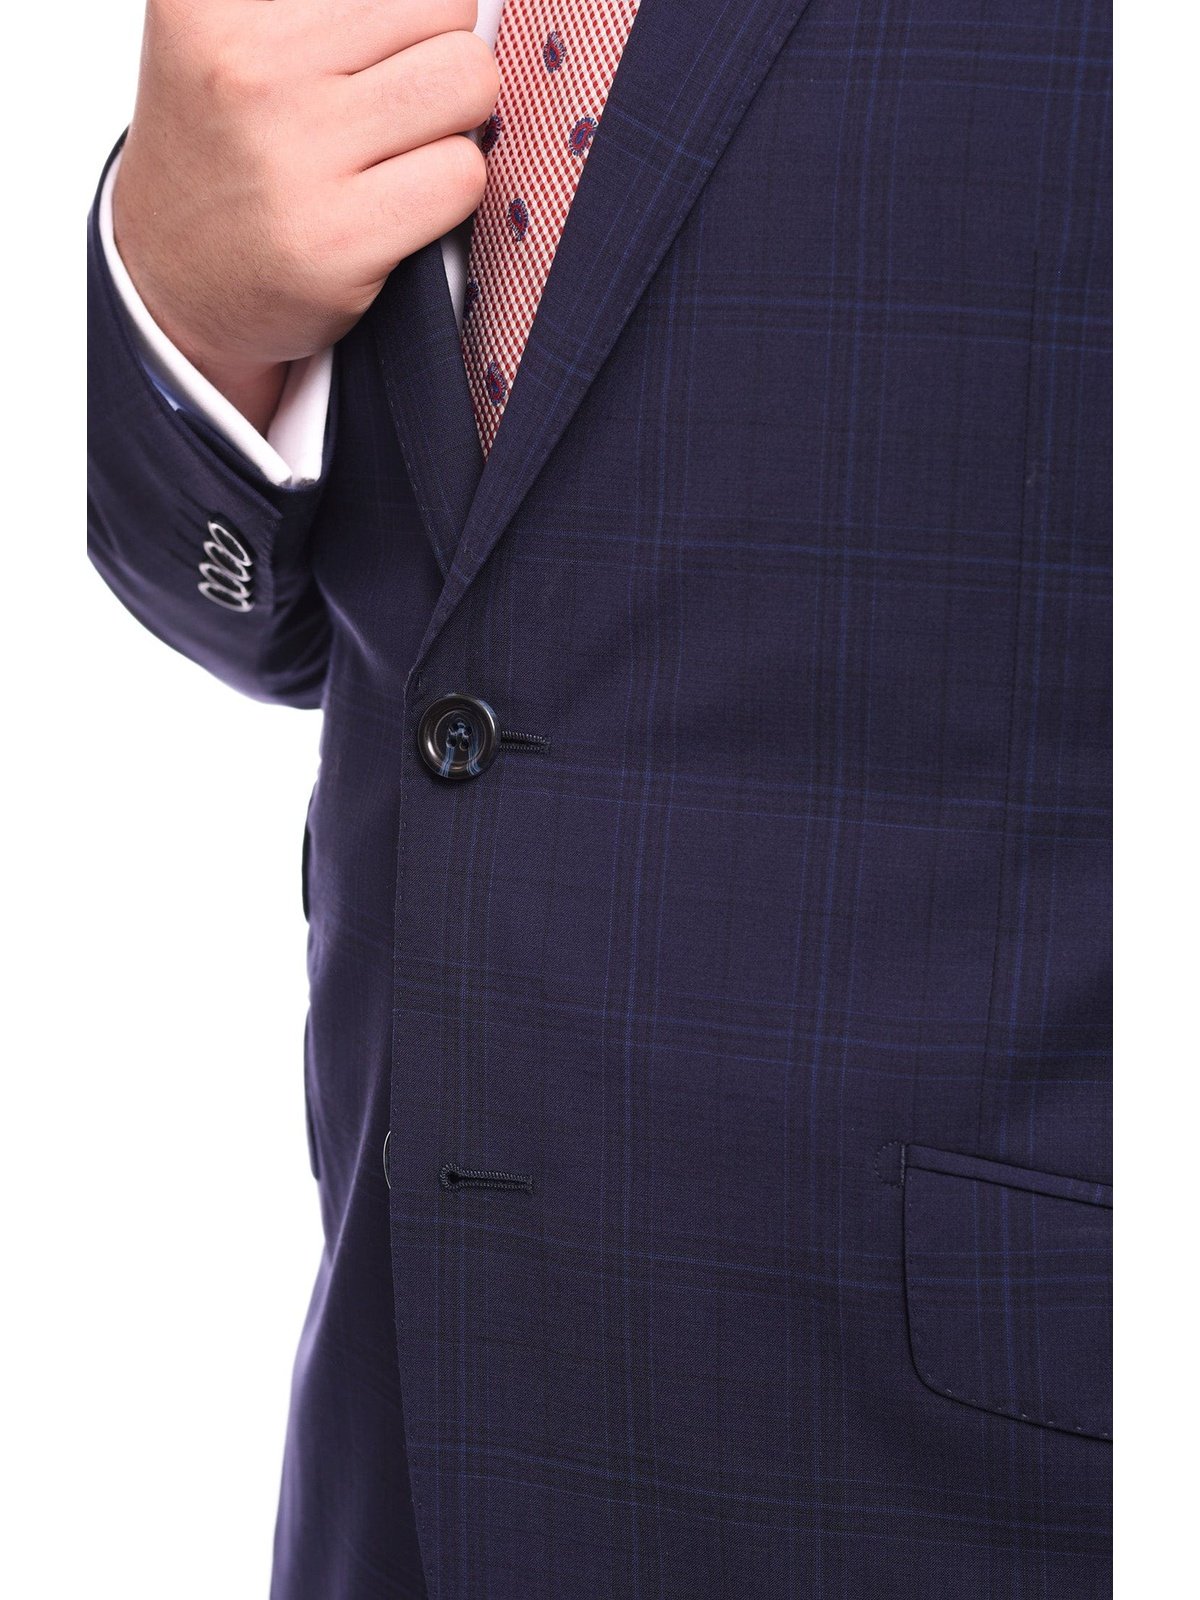 Napoli TWO PIECE SUITS Napoli Slim Fit Blue Plaid Windowpane Two Button Half Canvassed Wool Suit